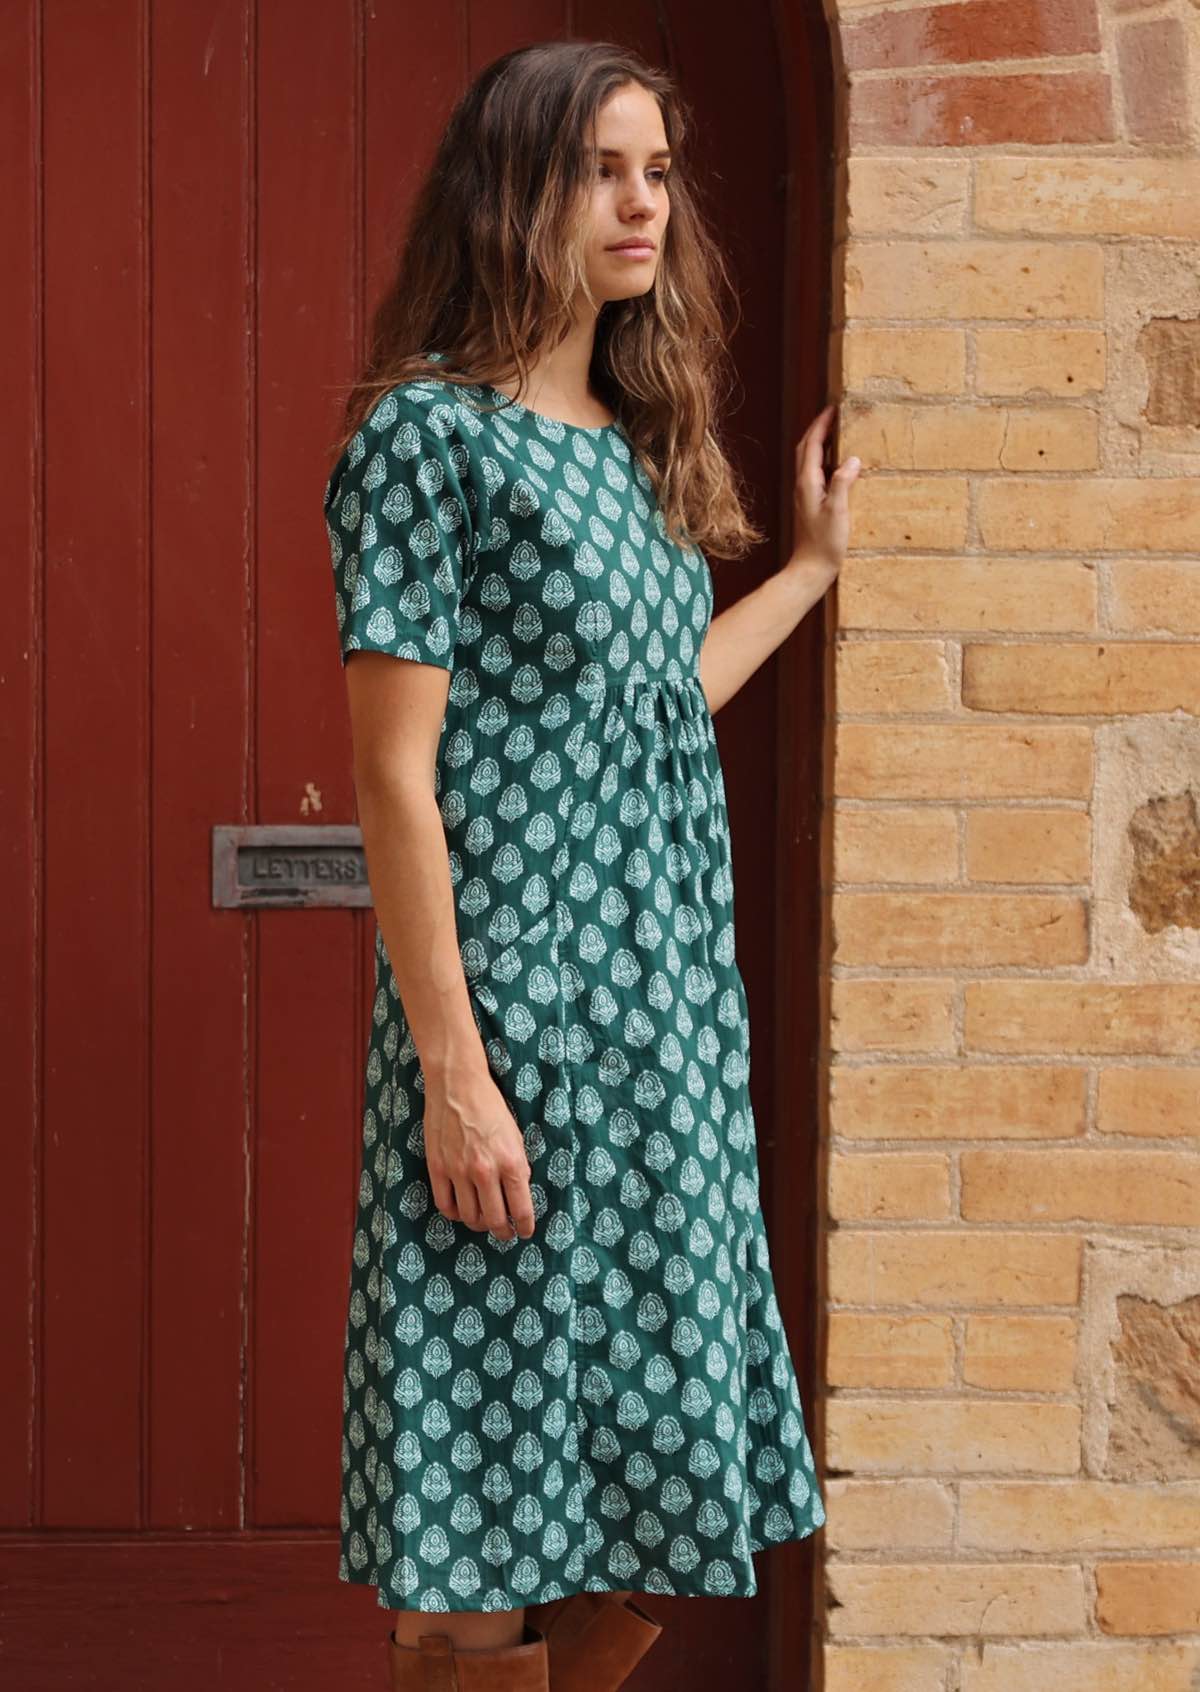 100% cotton dress with gathers in centre under the bodice, flanked by pockets